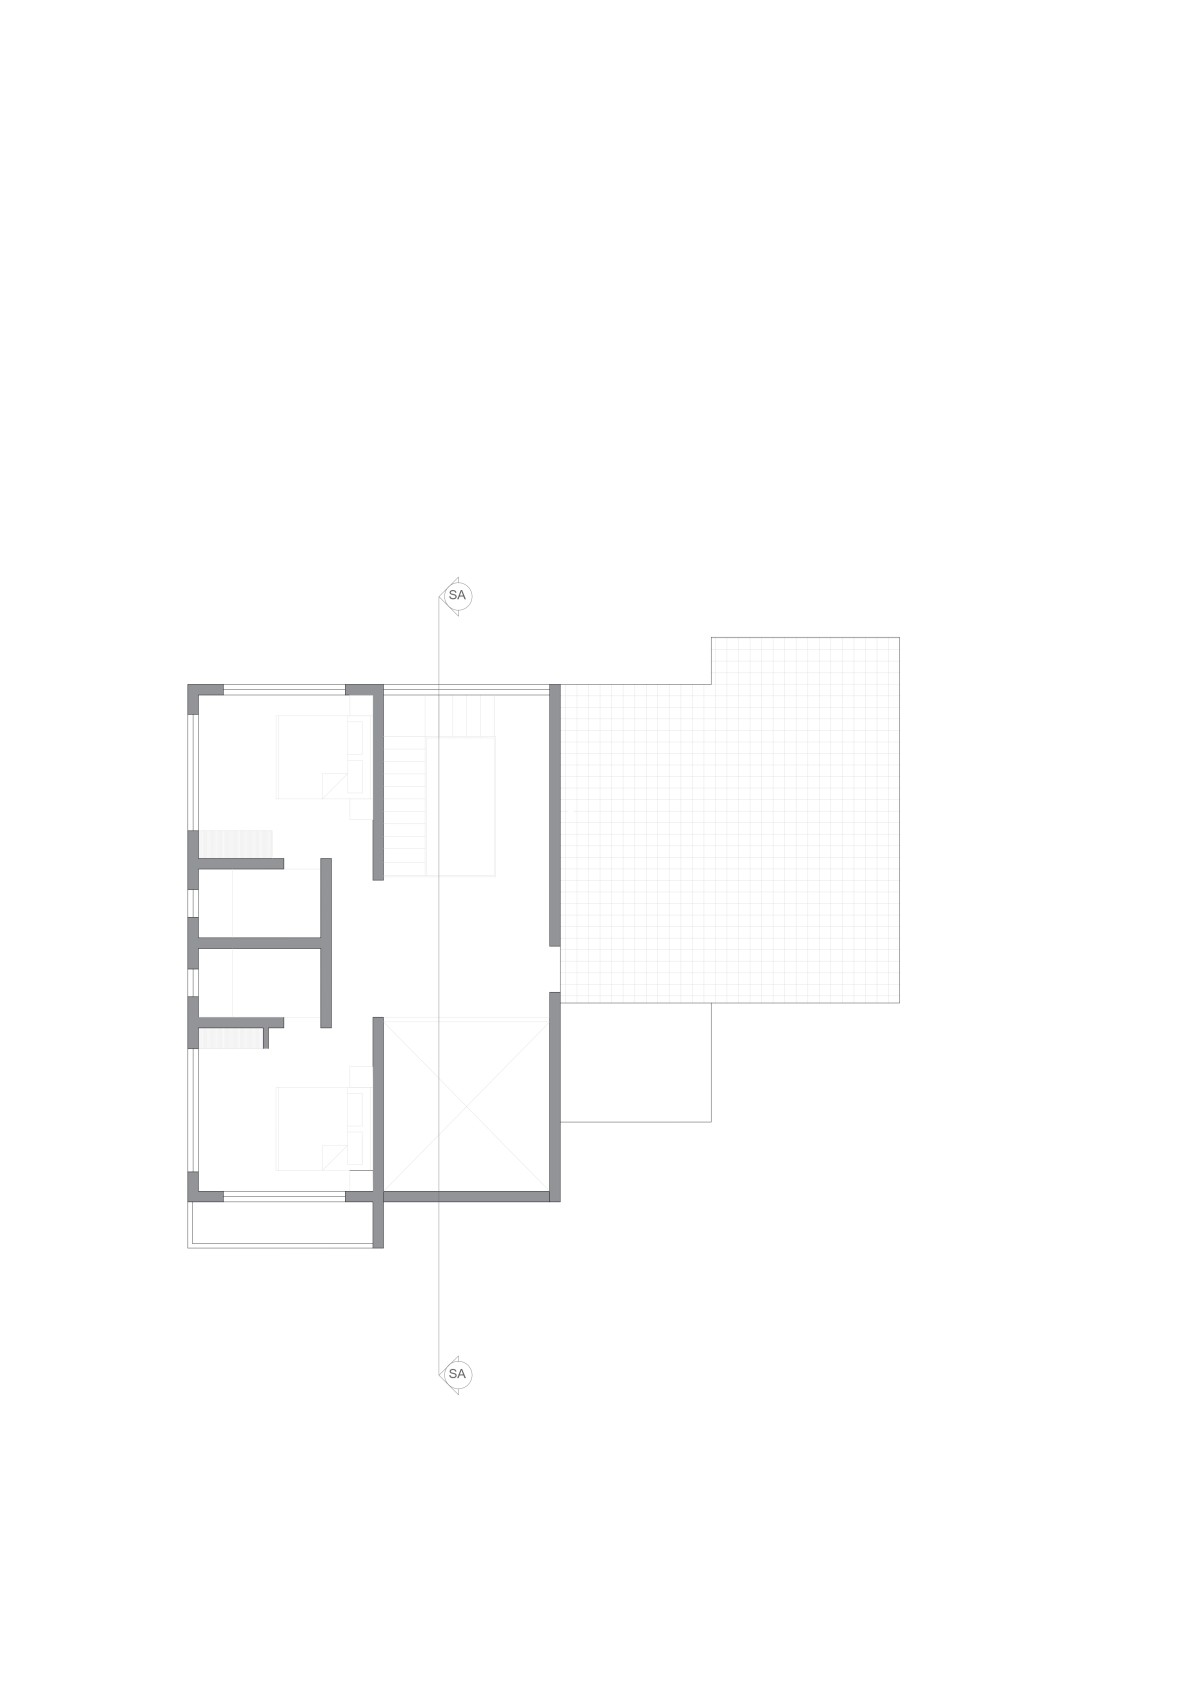 First floor plan of Alibhais House by Eleventh Floor Architects